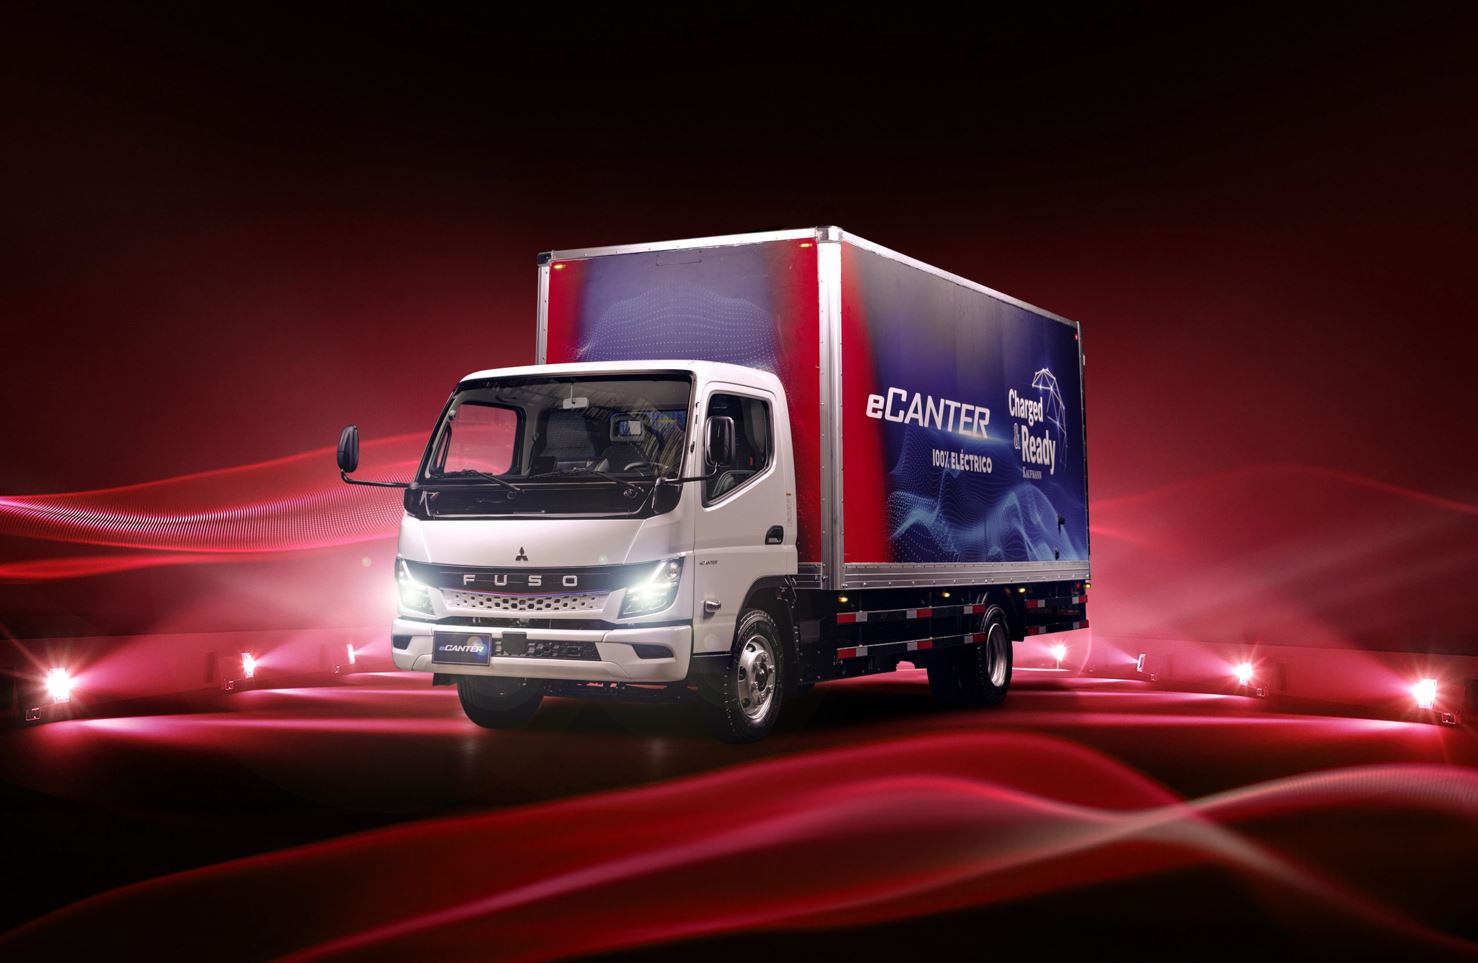 fuso-s-all-electric-light-duty-ecanter-truck-introduced-to-chile-marking-the-first-south-american-market-launch